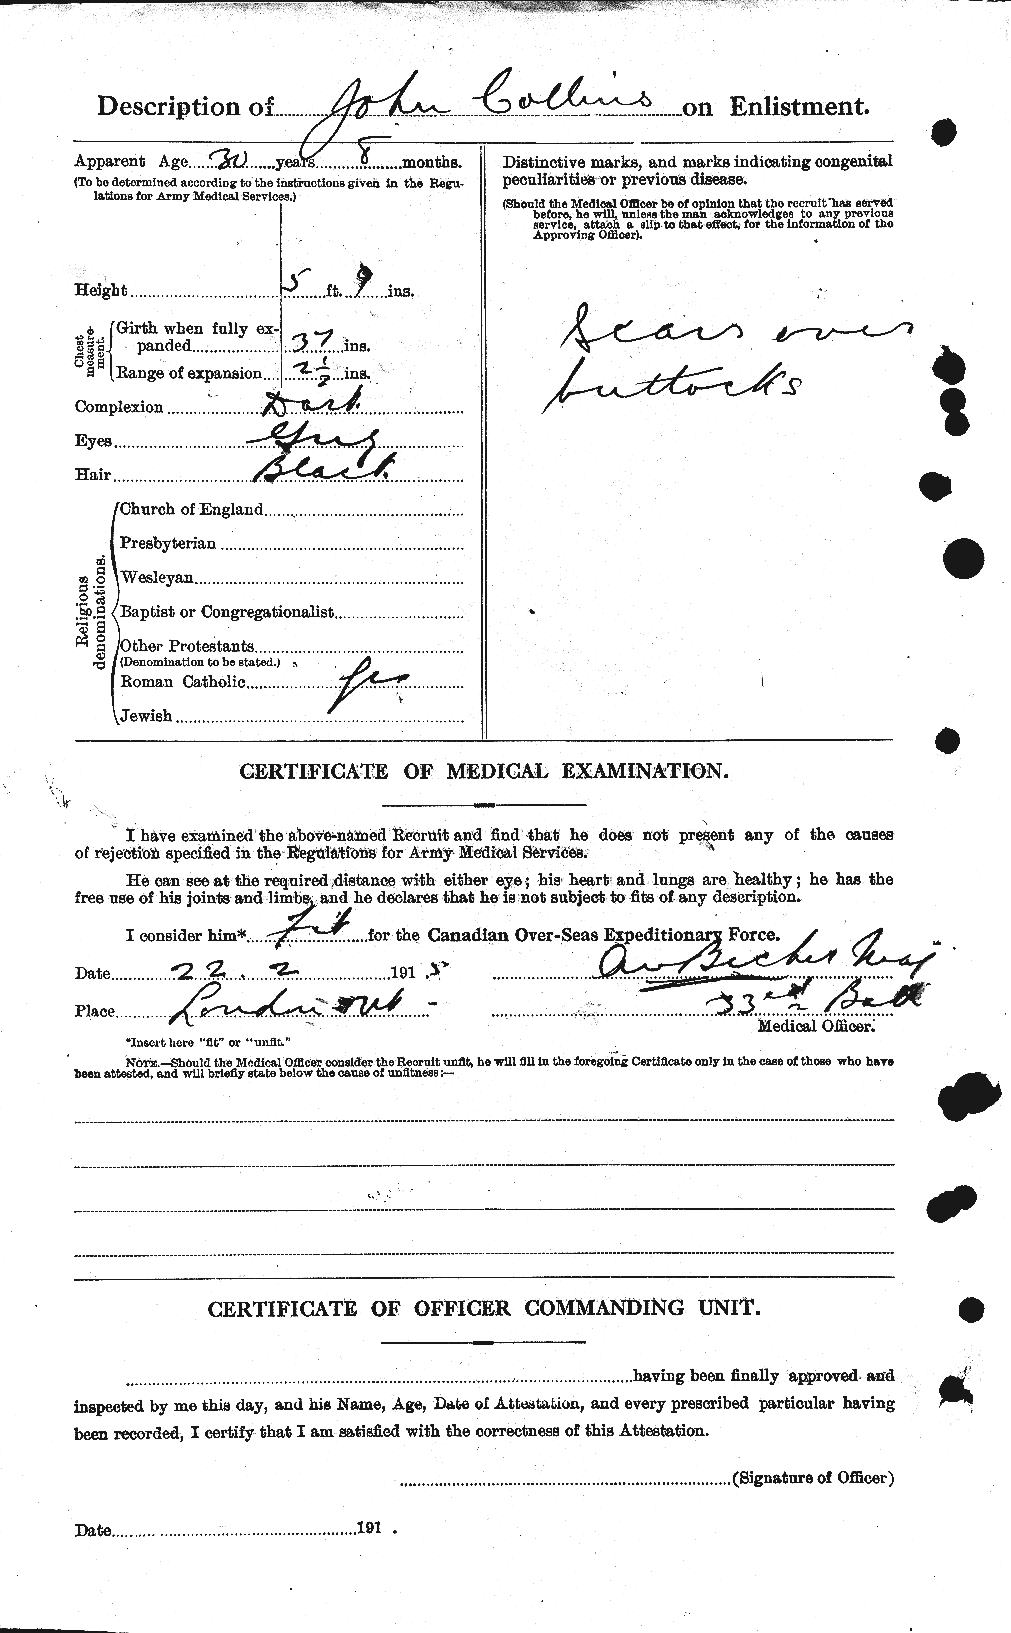 Personnel Records of the First World War - CEF 069812b